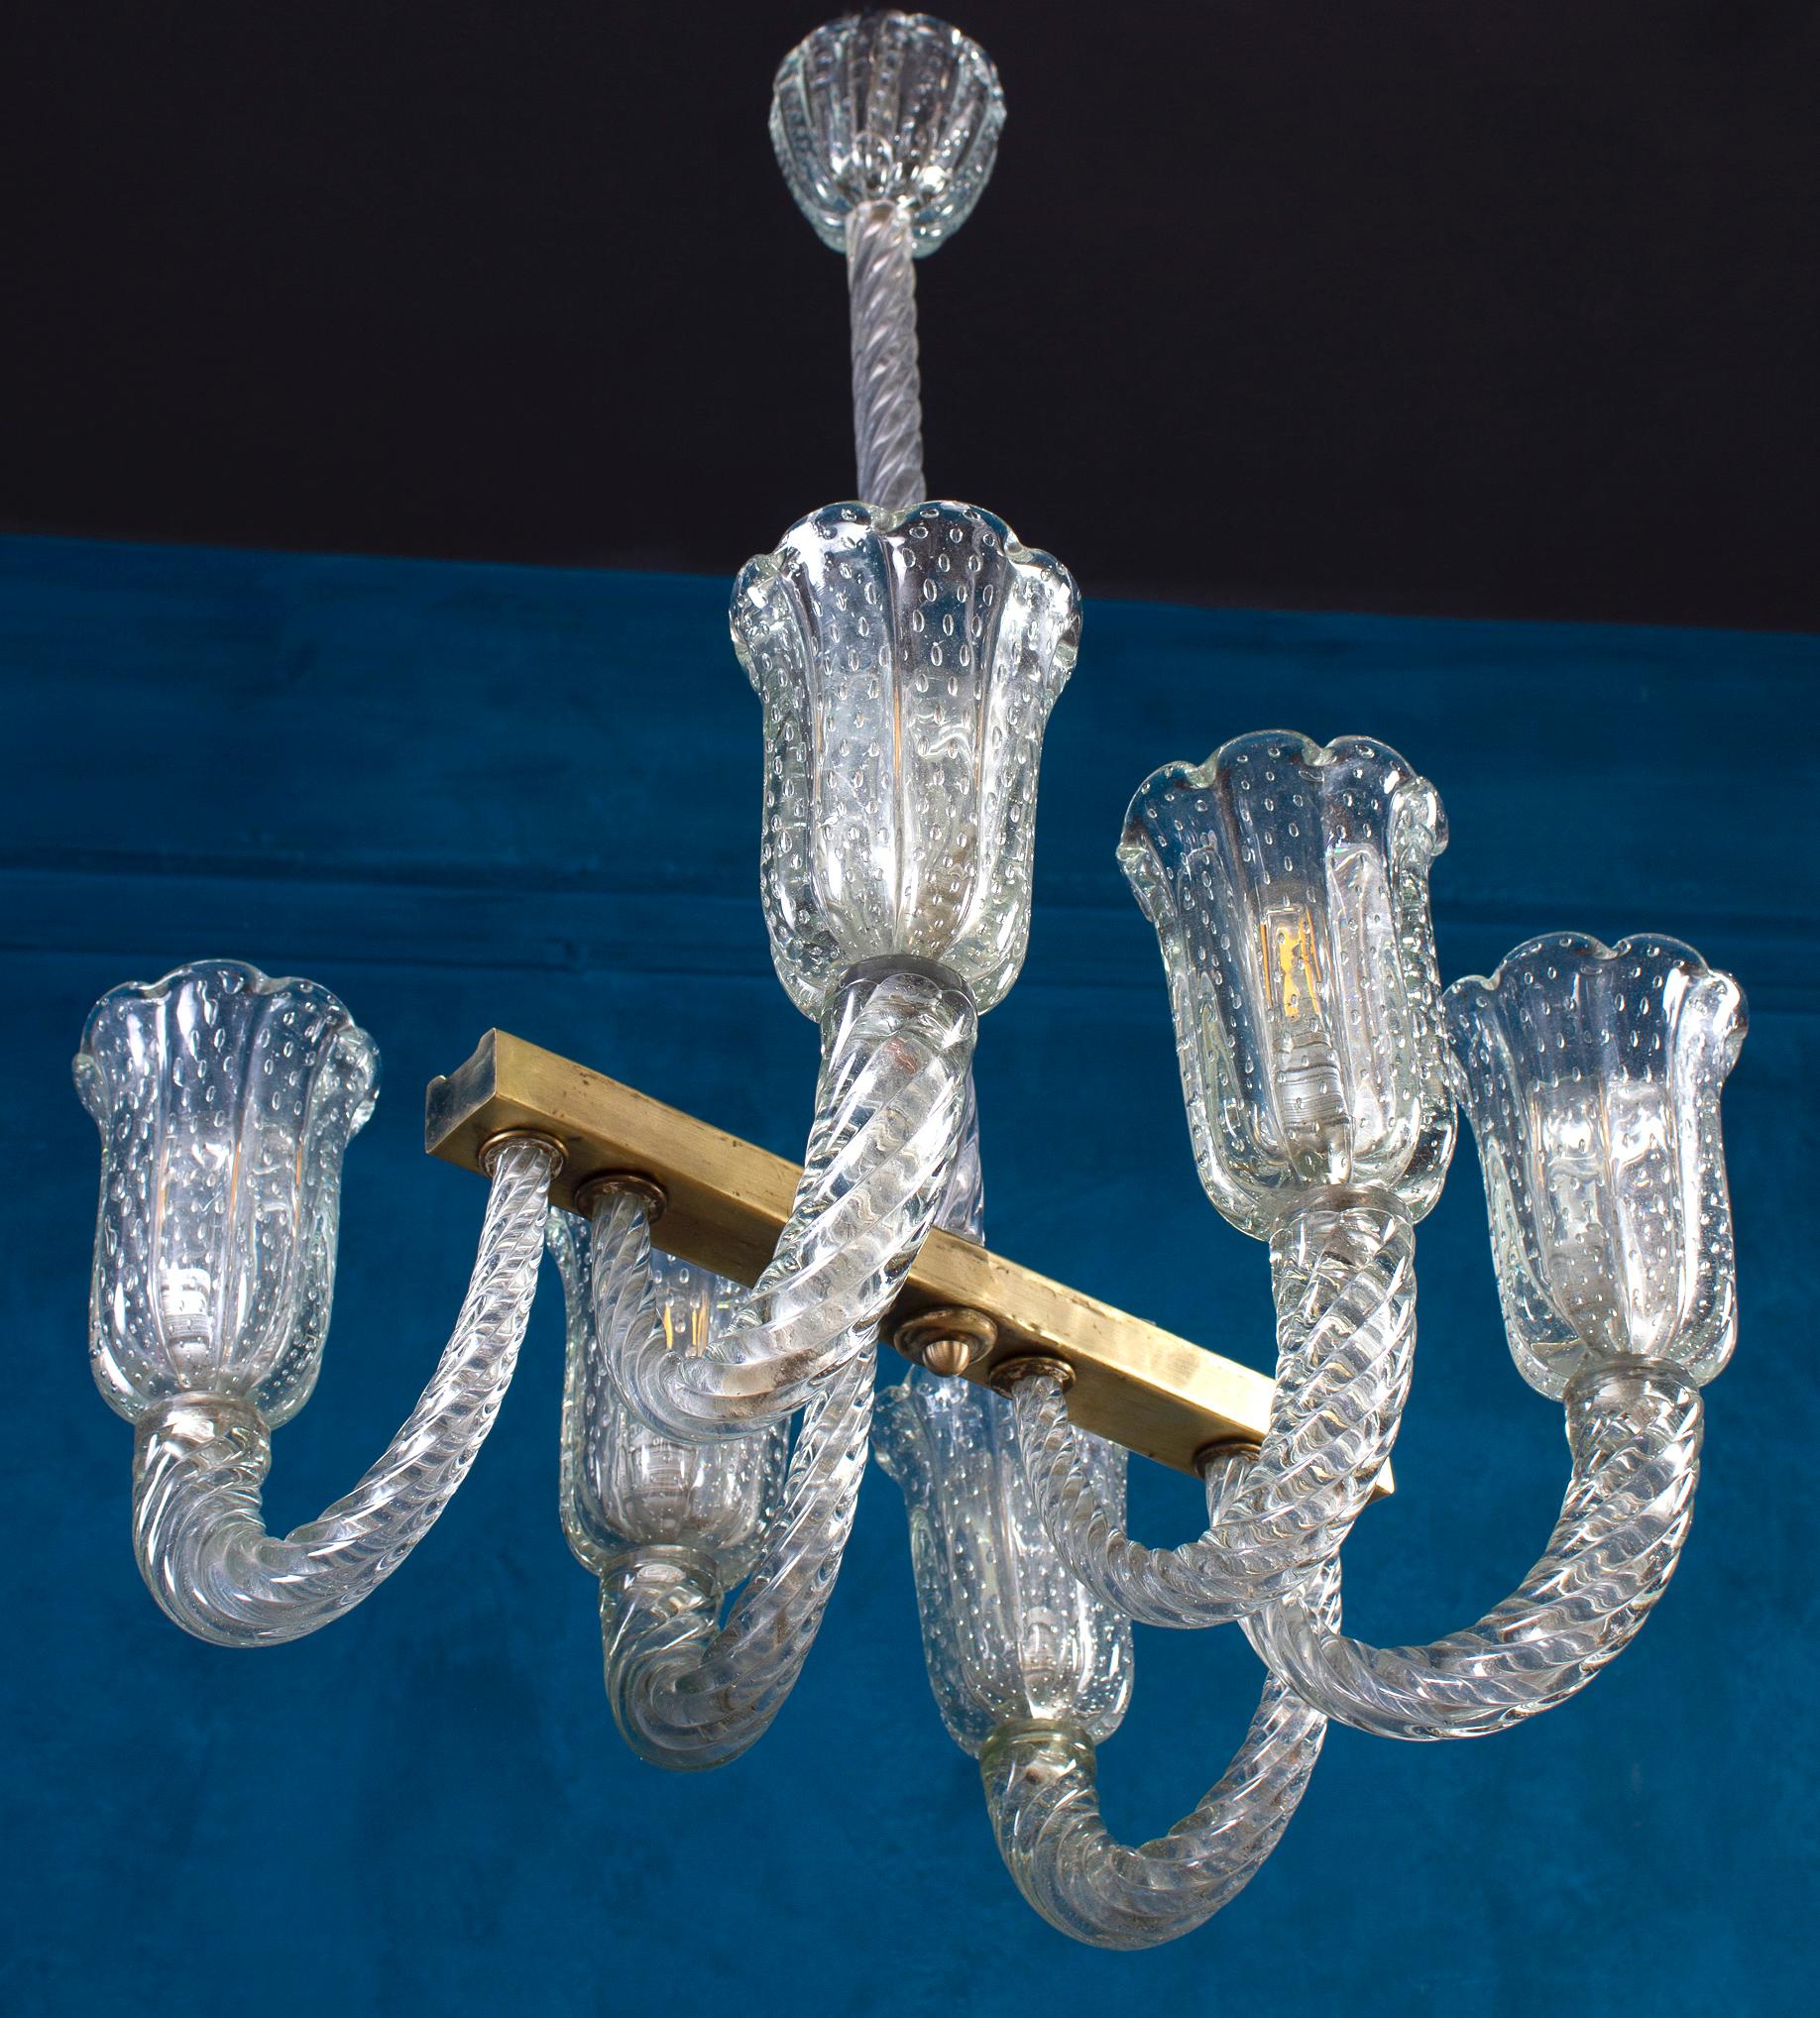 Imposing Art Deco Chandelier by Barovier & Toso In Excellent Condition For Sale In Rome, IT